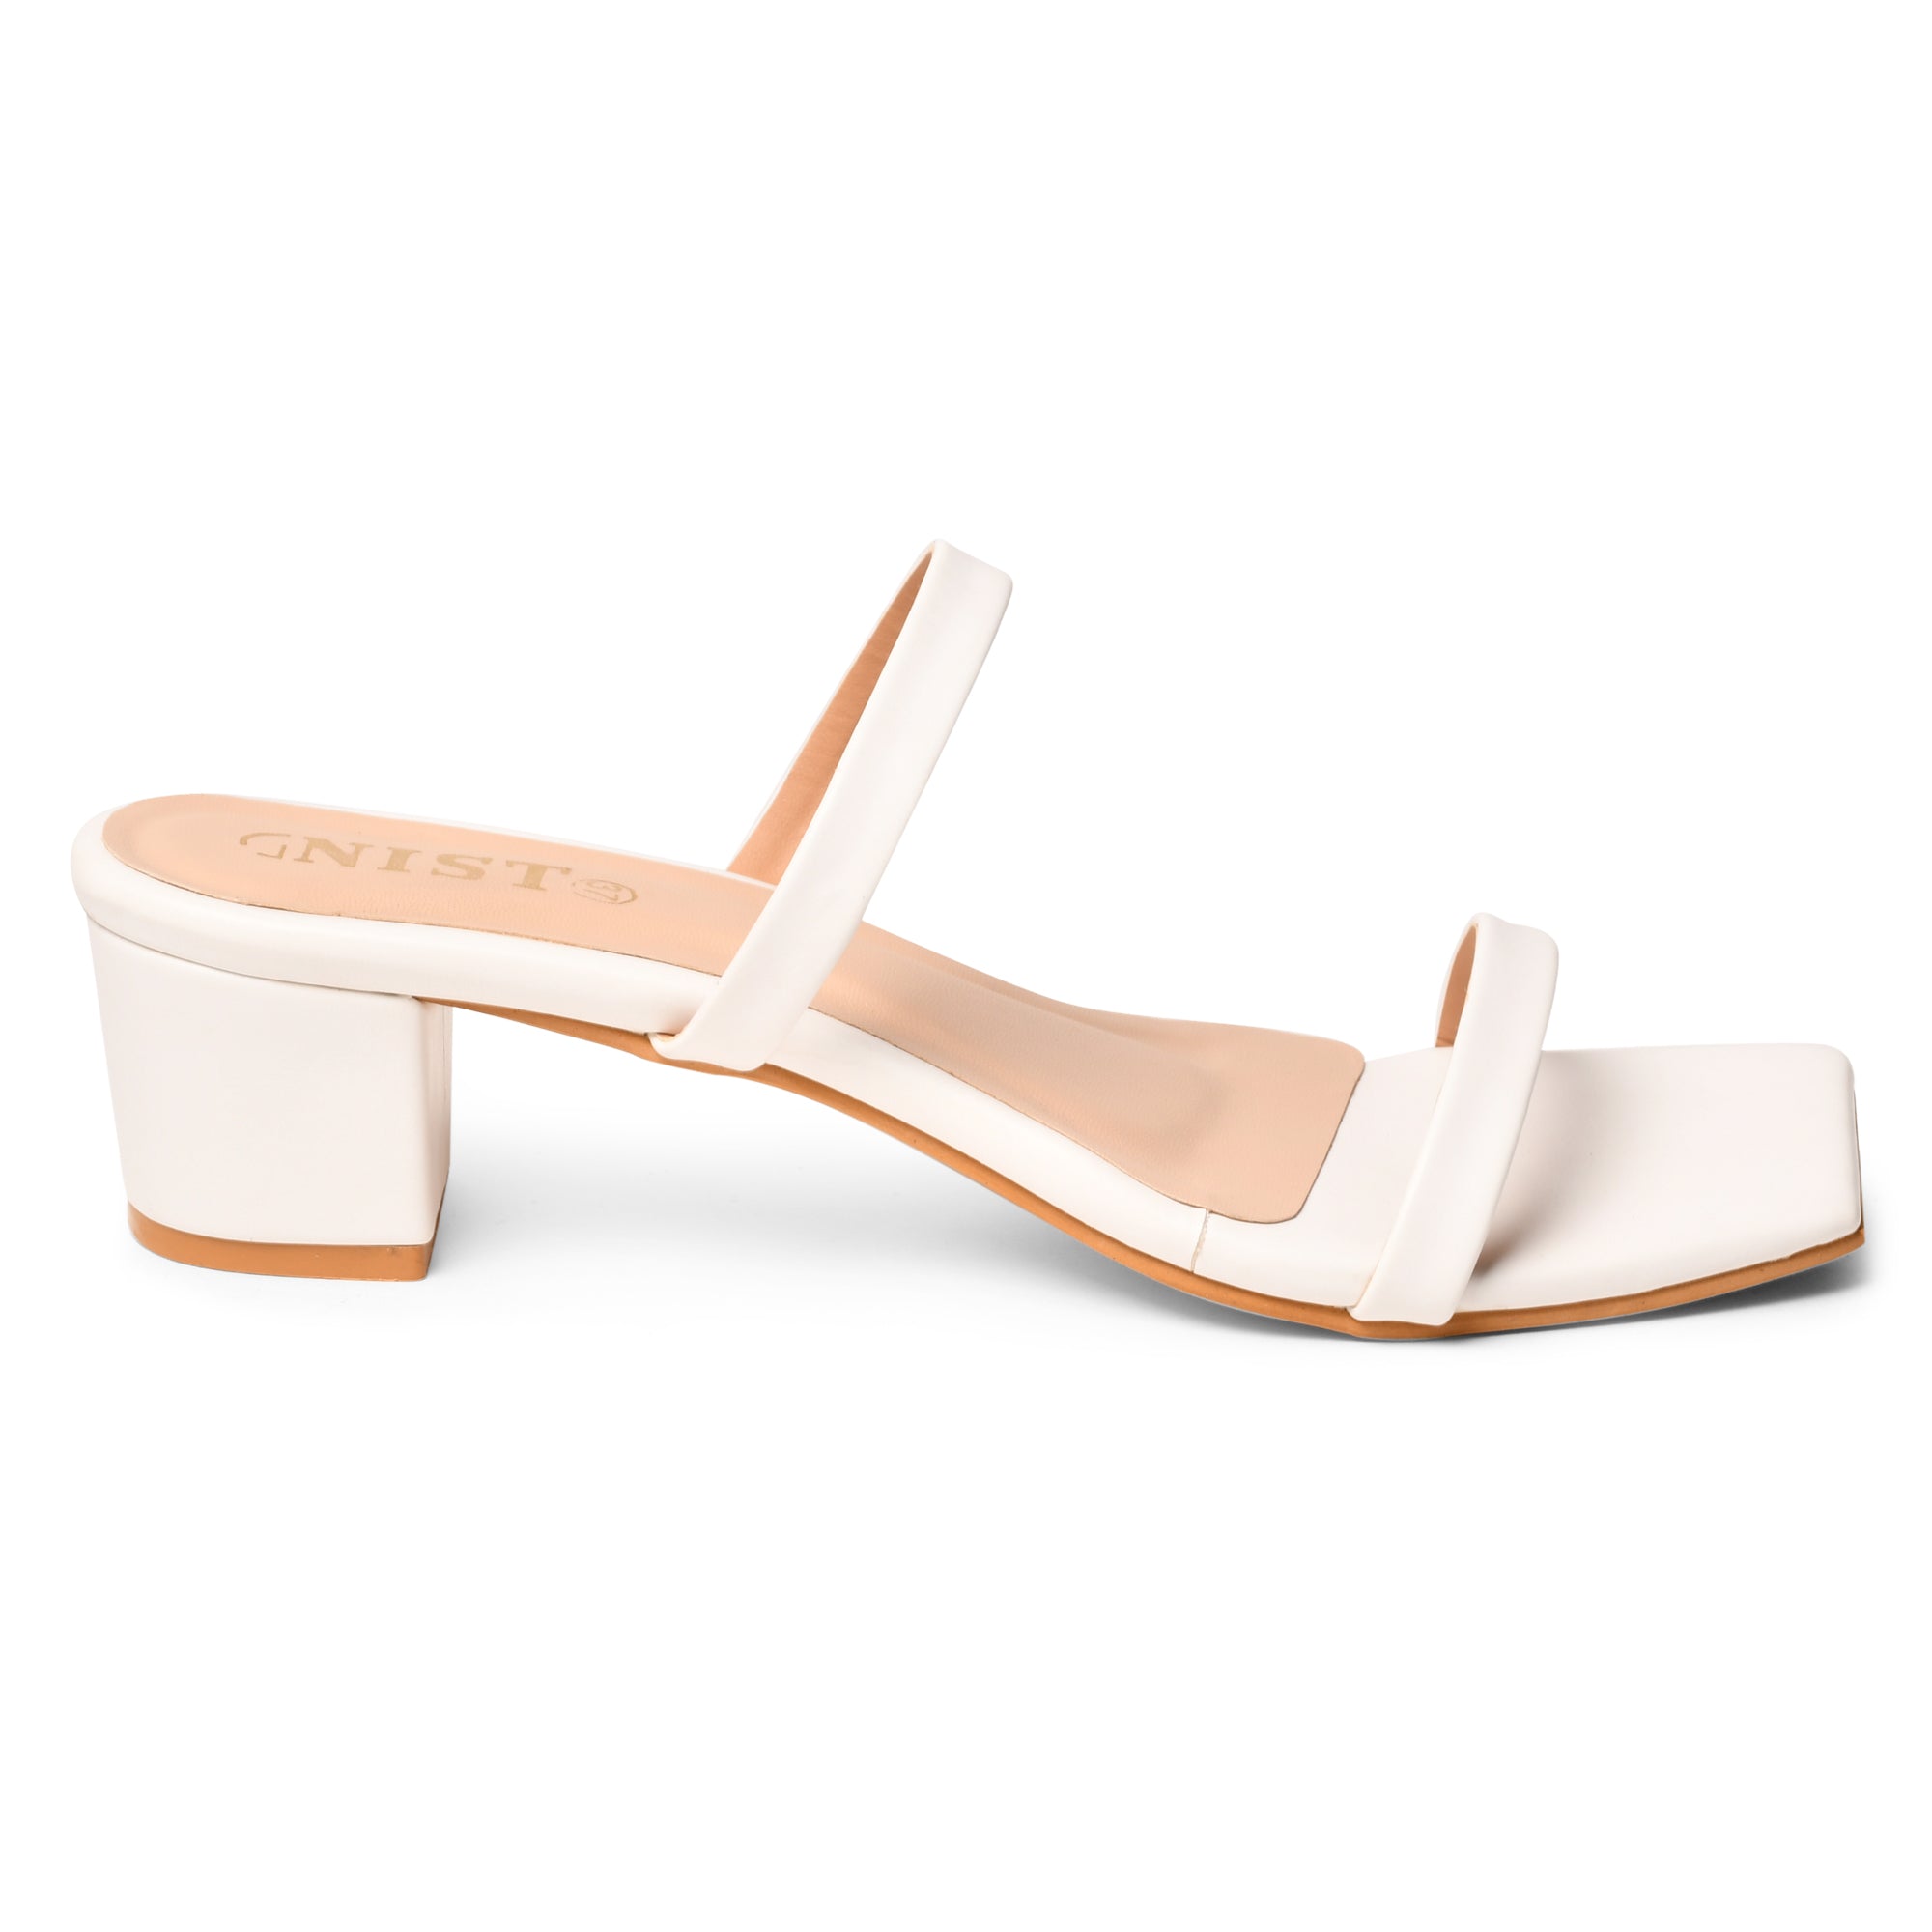 GNIST Double Strap White Chunky Heels